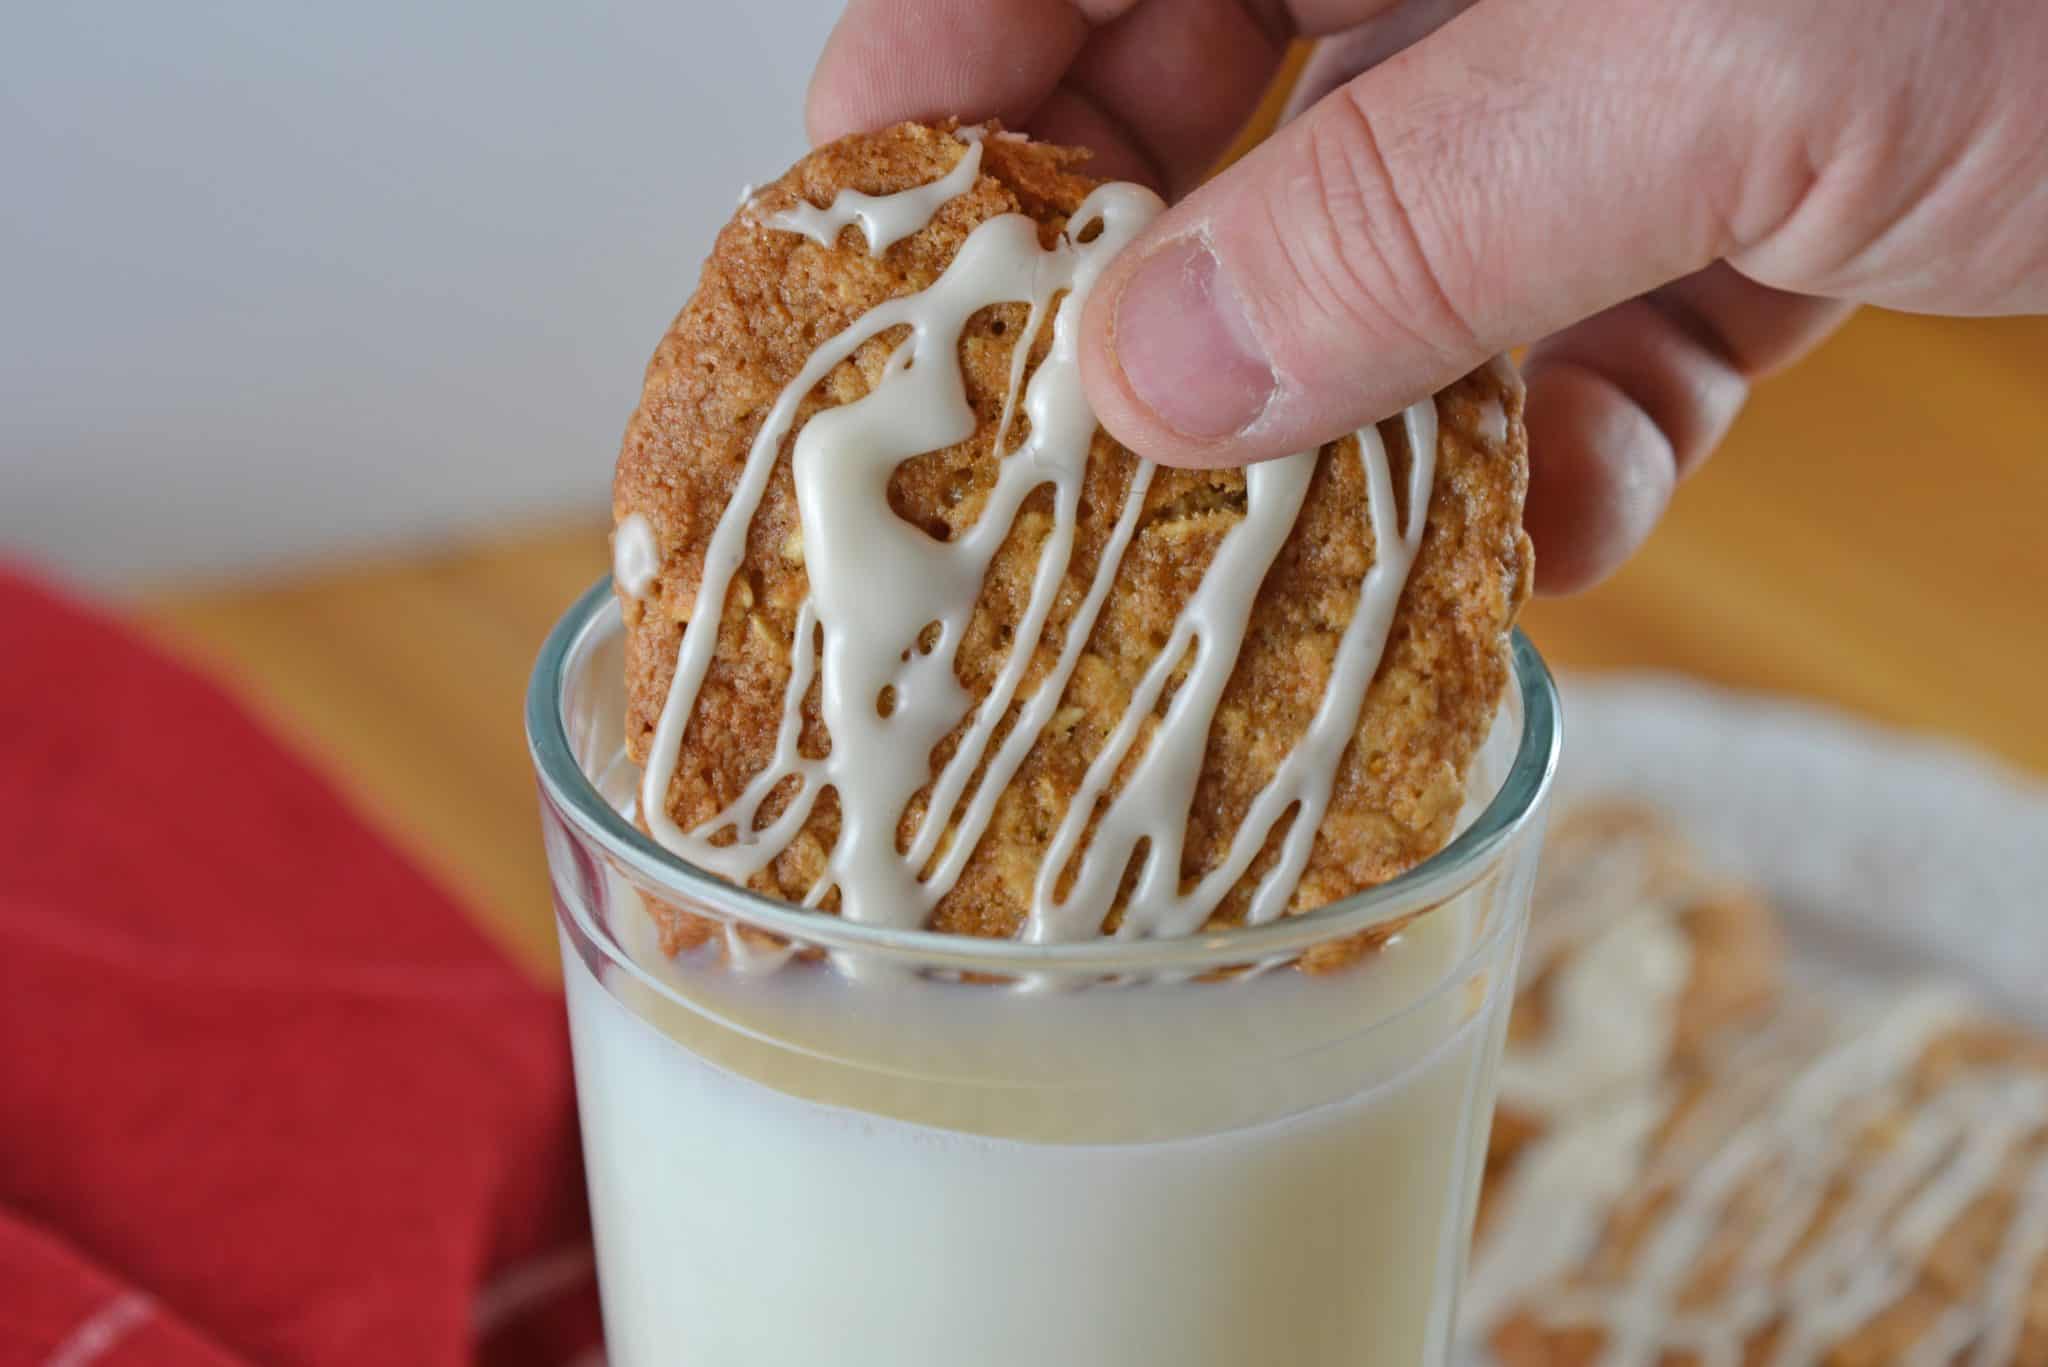 Maple Oatmeal Cookies take traditional oatmeal cookies up a notch with a maple glaze. Always a crowd pleaser, these cookies are great for parties and BBQs!